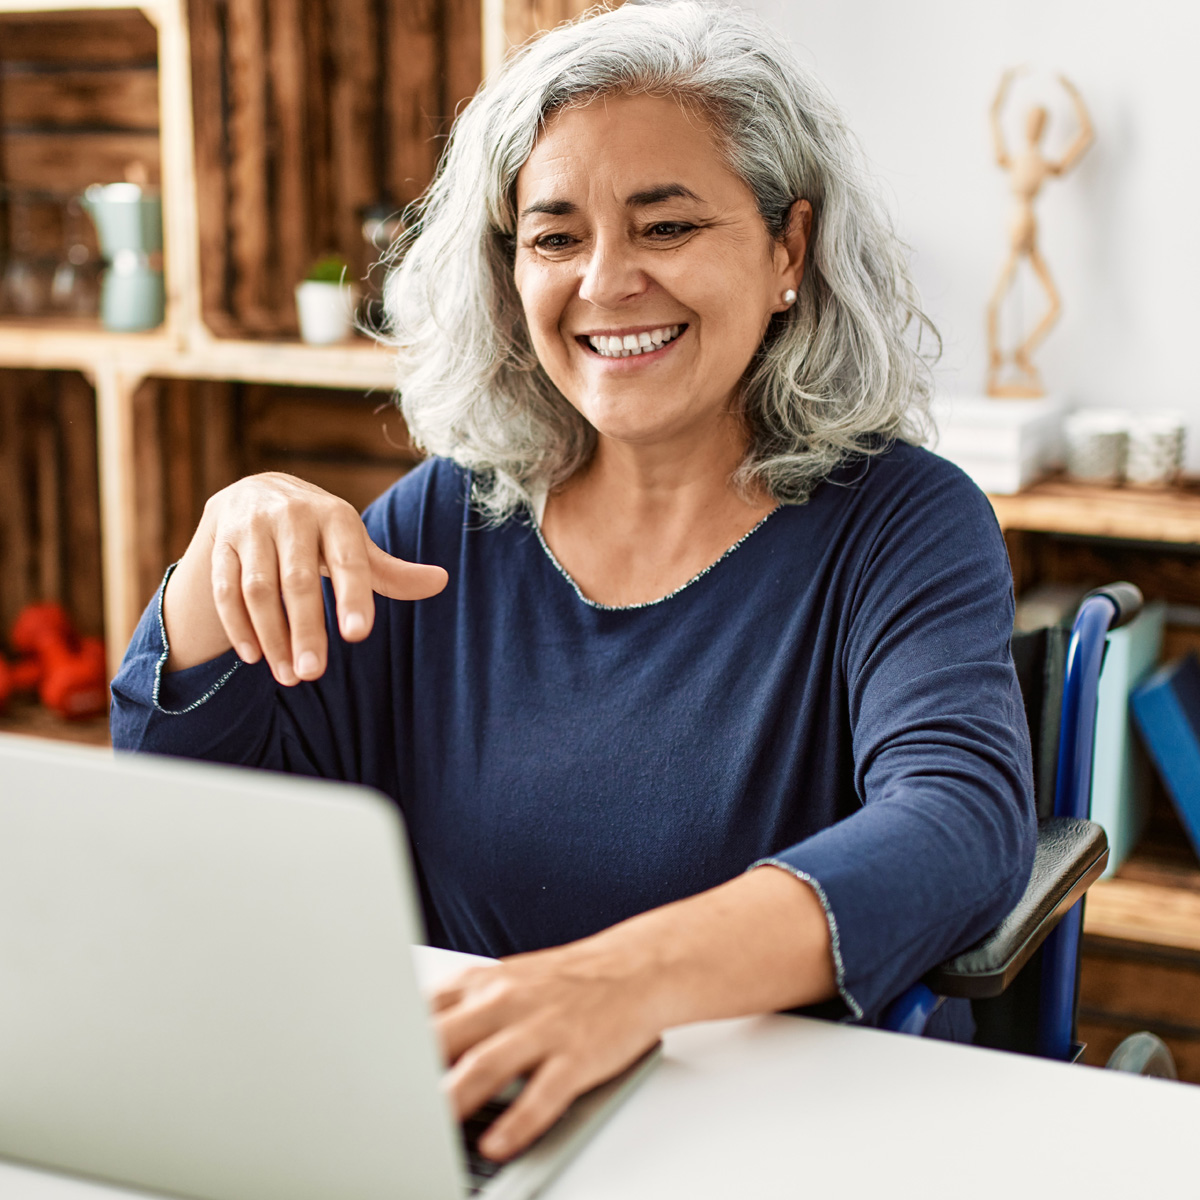 Woman looking at laptop screen and smiling